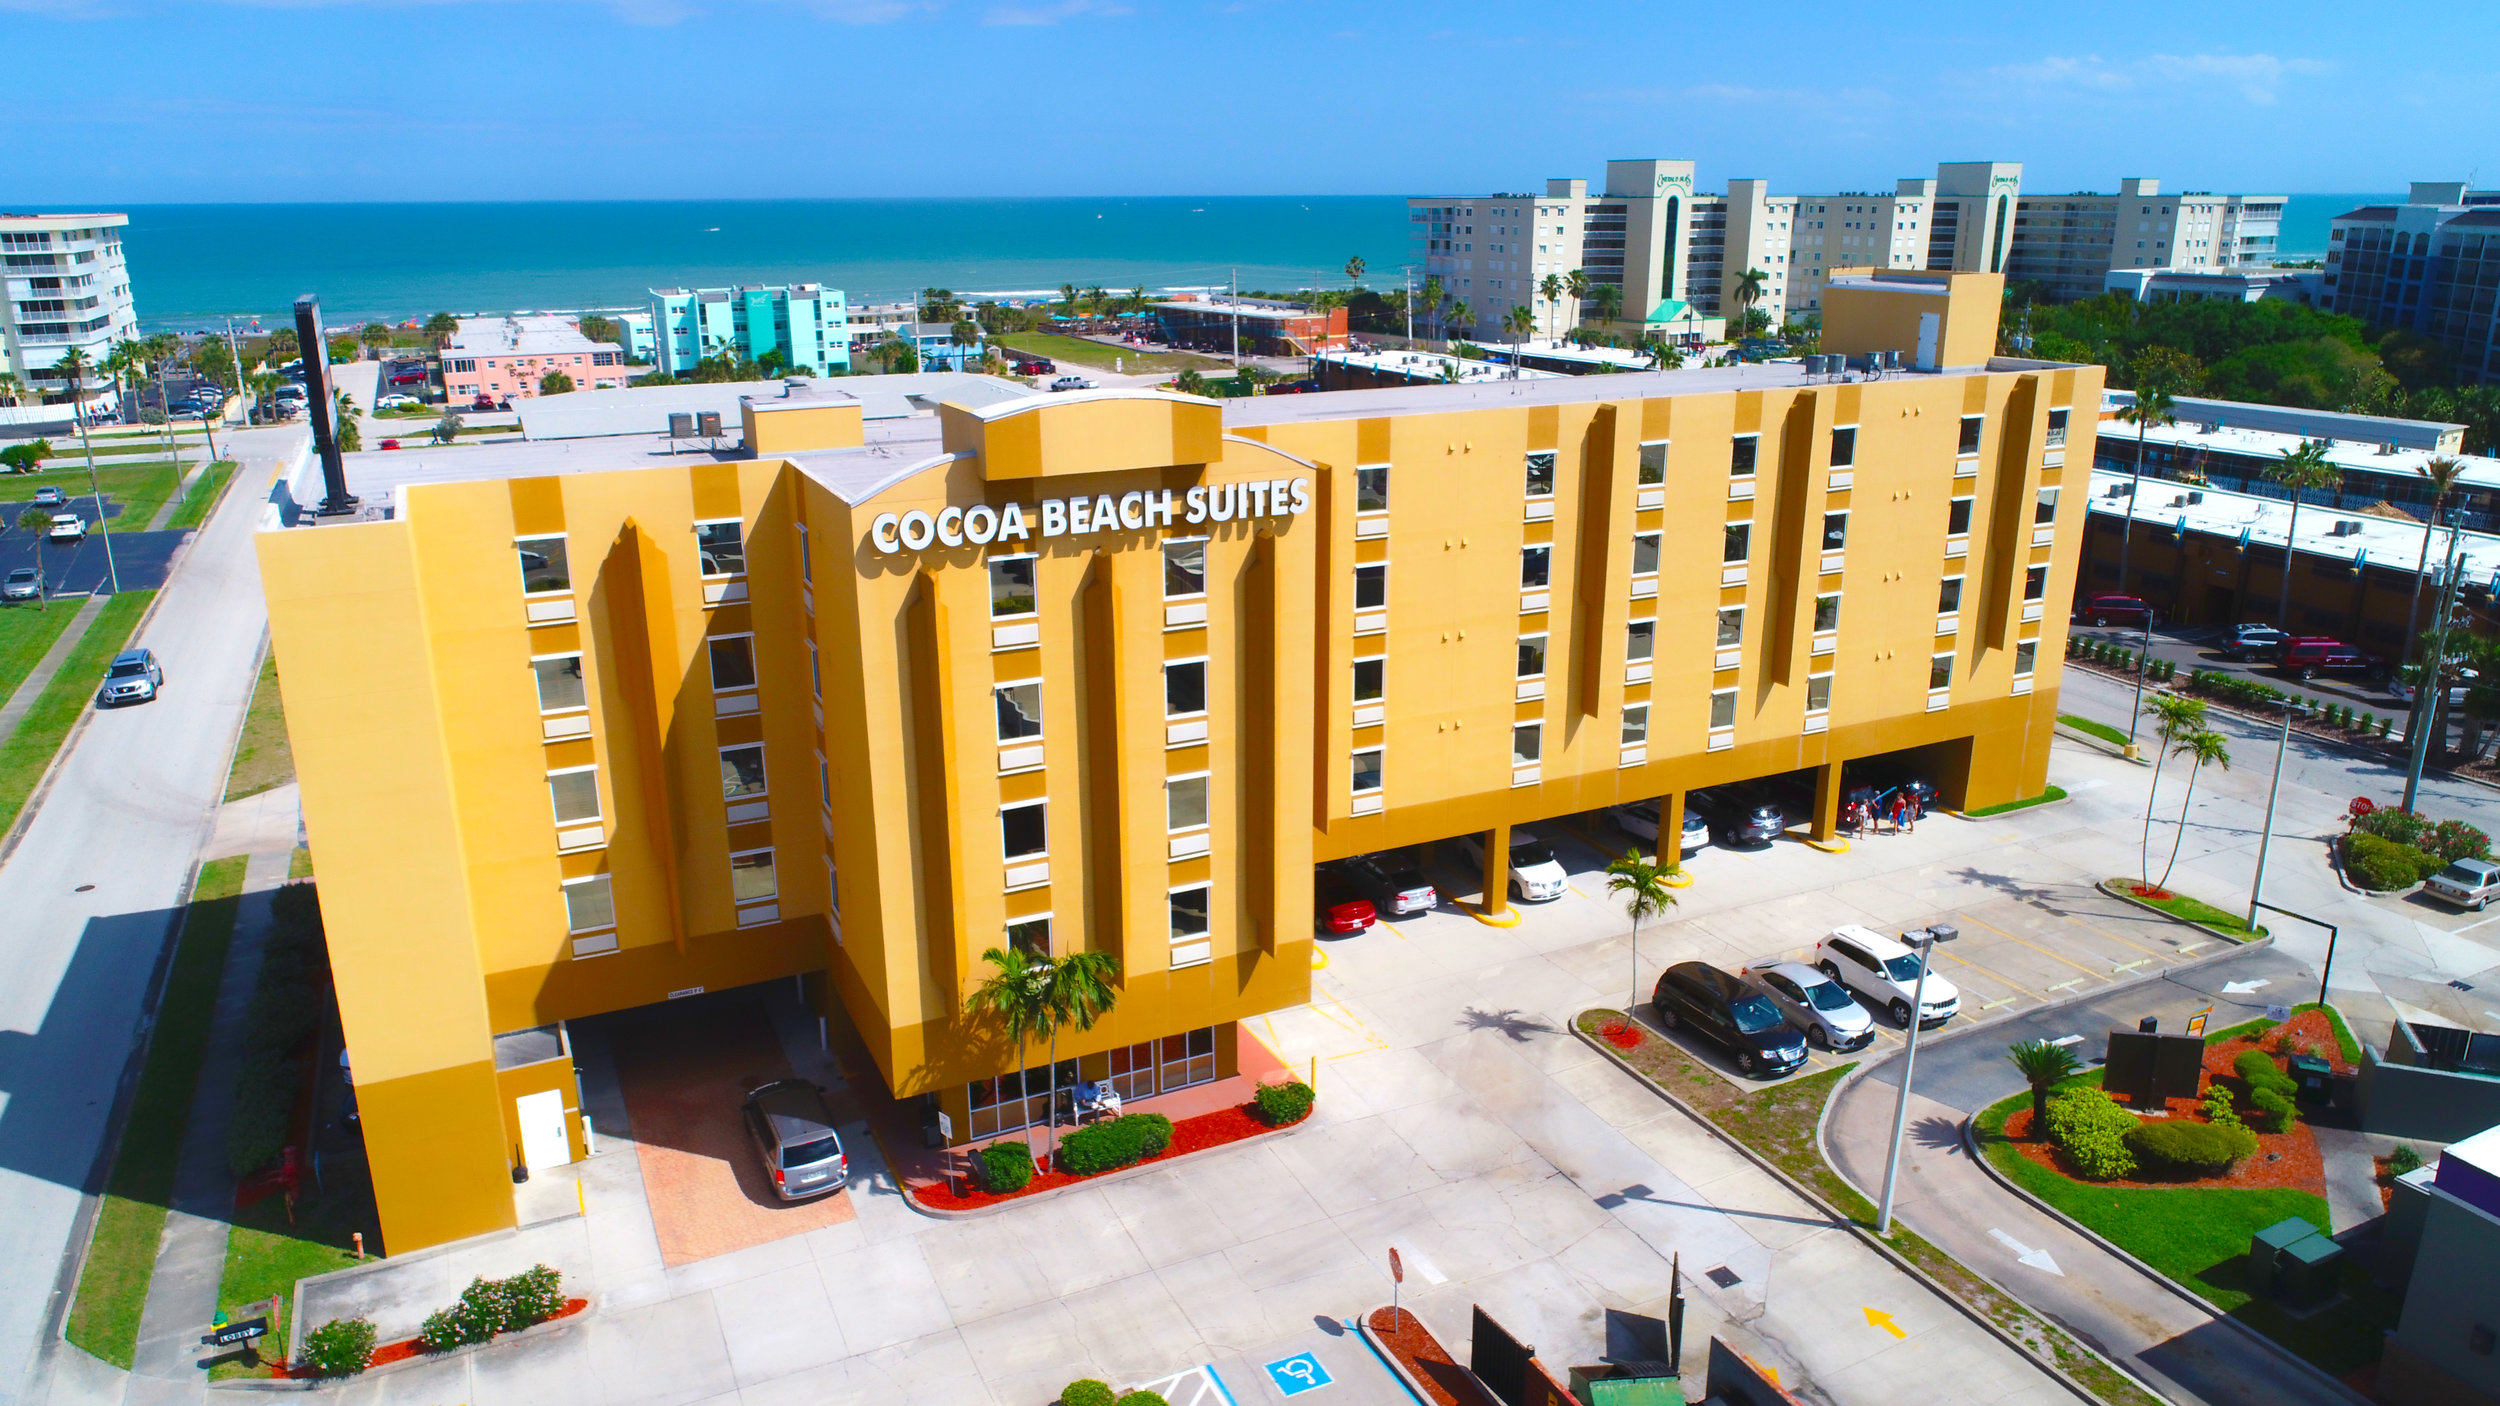 Image sourced from the Cocoa Beach Suites' website at: https://www.google.com/url?sa=i&url=https%3A%2F%2Fwww.cocoabeachsuites.com%2F&psig=AOvVaw0GnDbEFafYaFWp_nLTiMQG&ust=1669368764571000&source=images&cd=vfe&ved=0CBAQjRxqFwoTCODaqLbBxvsCFQAAAAAdAAAAABAE